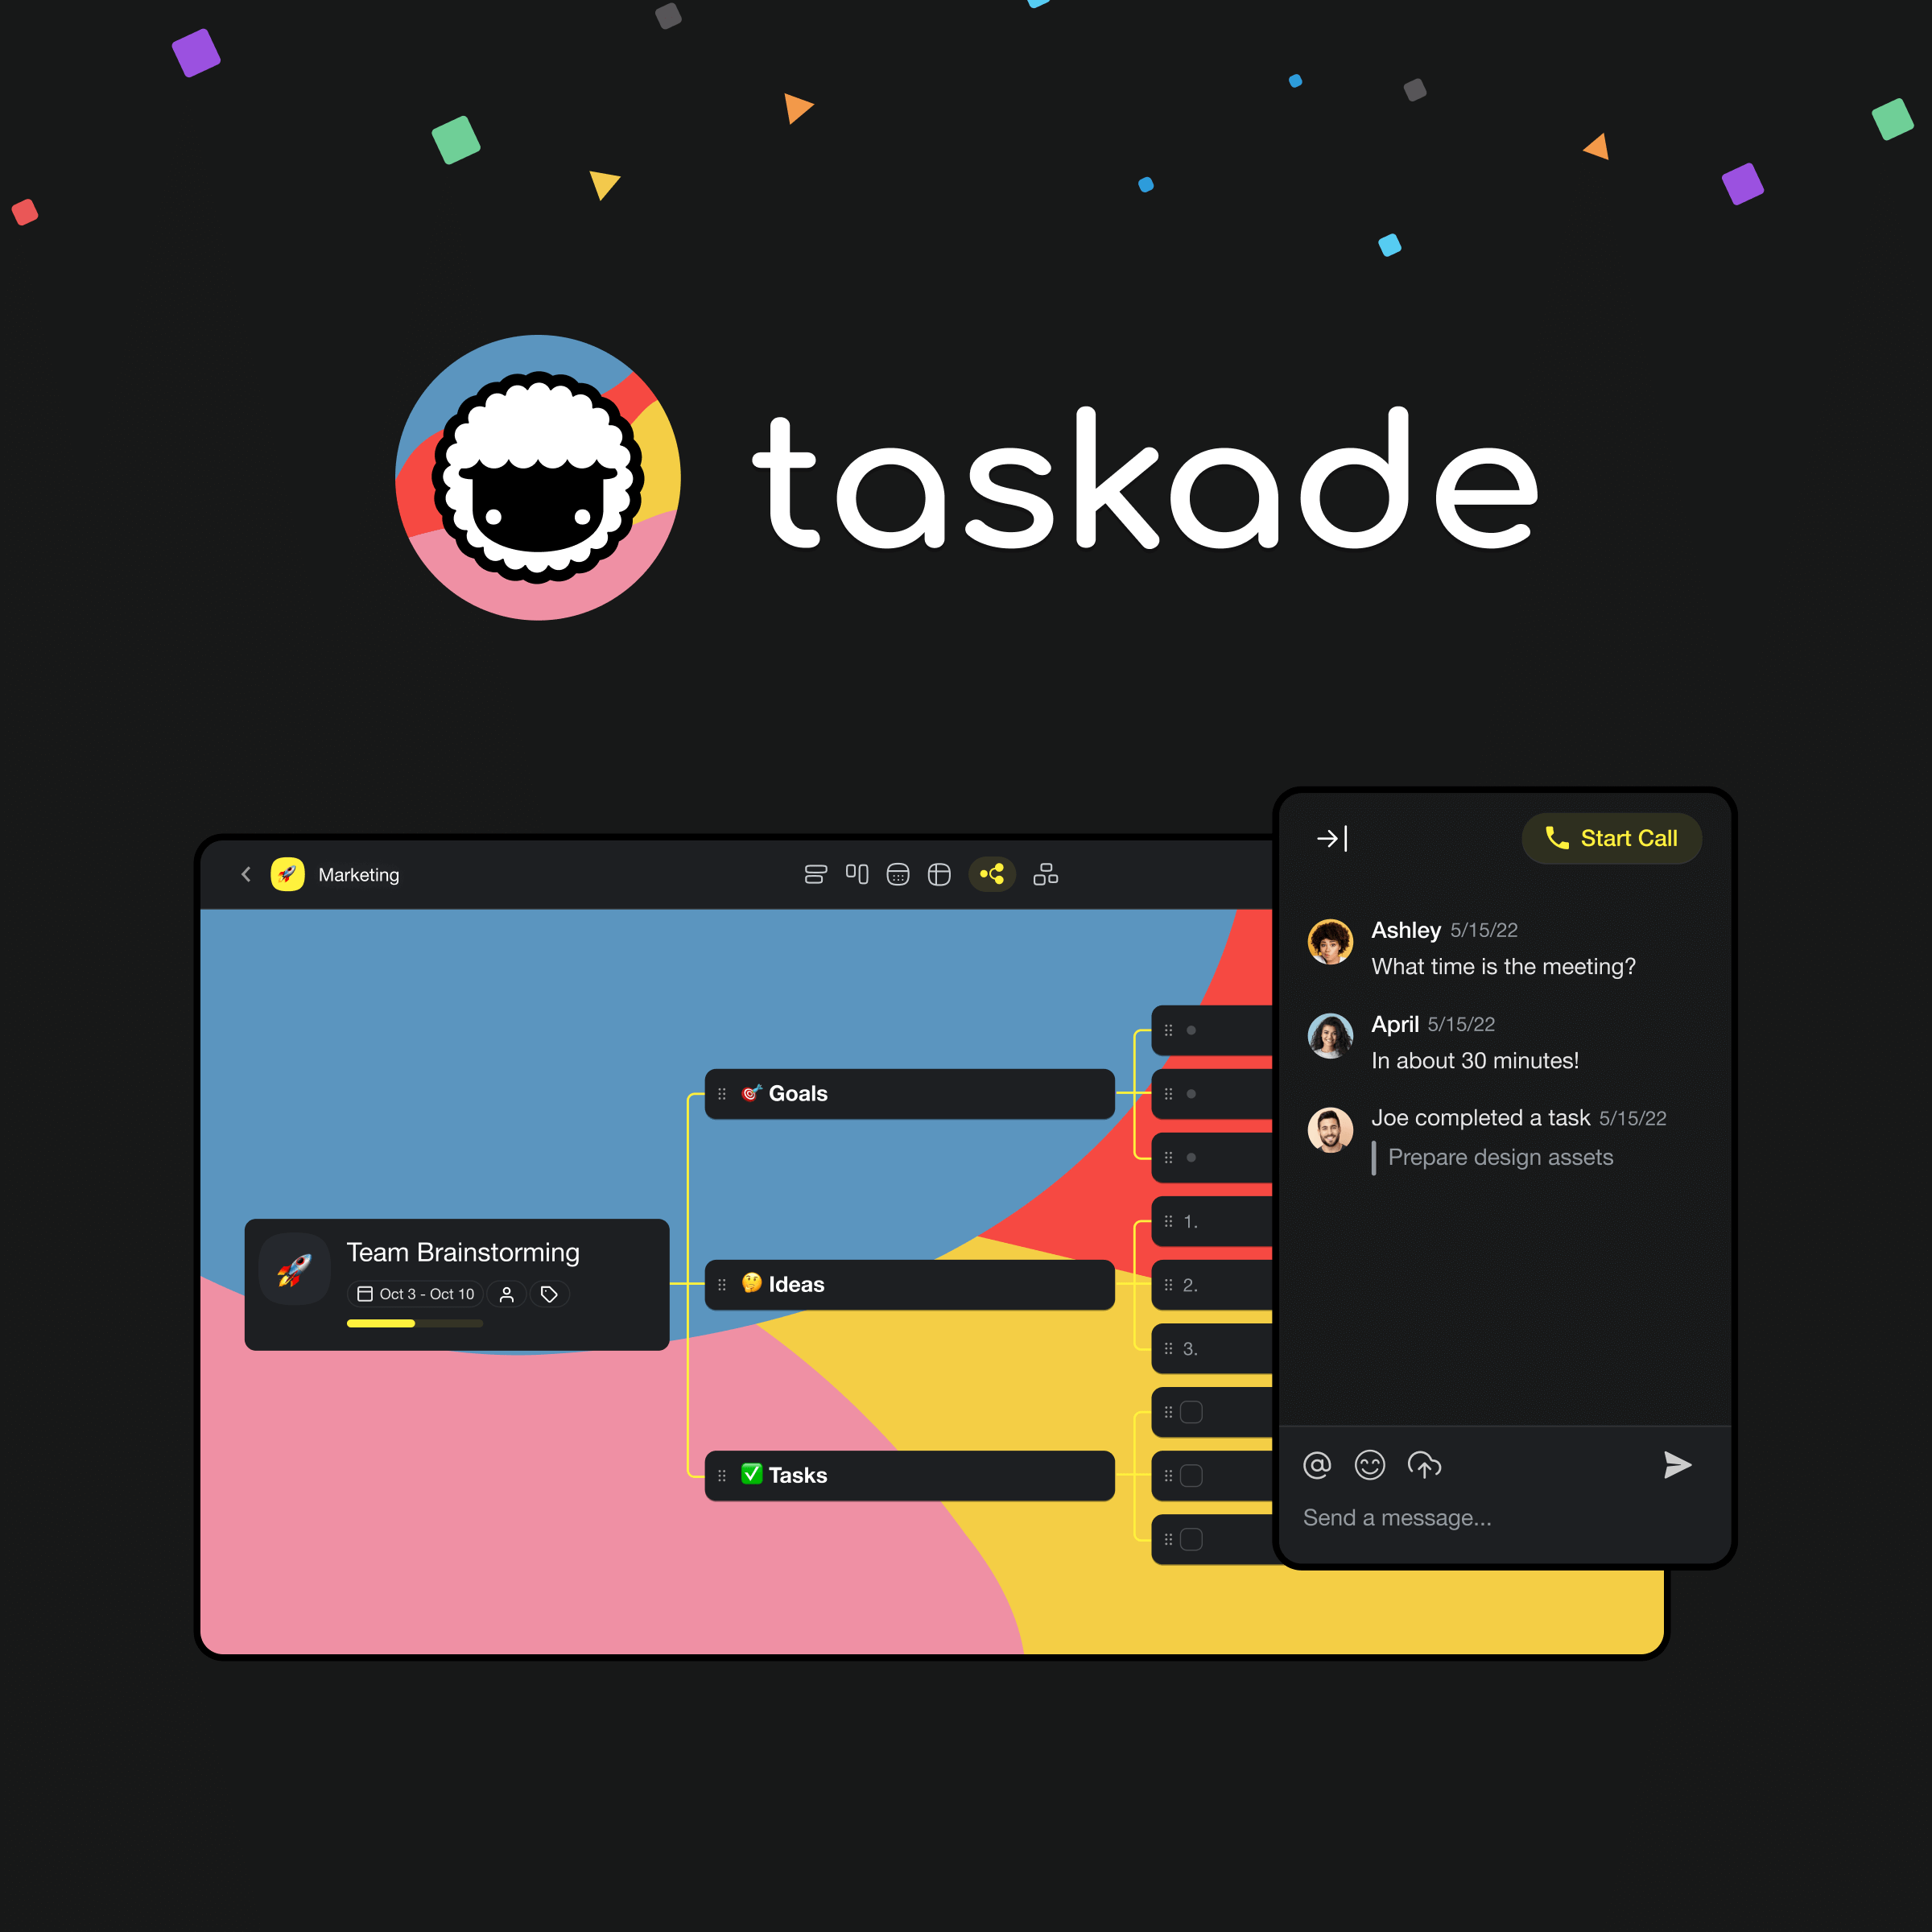 Taskade has launched its new AI-powered templates to automate task management, structured note-taking, and mind mapping